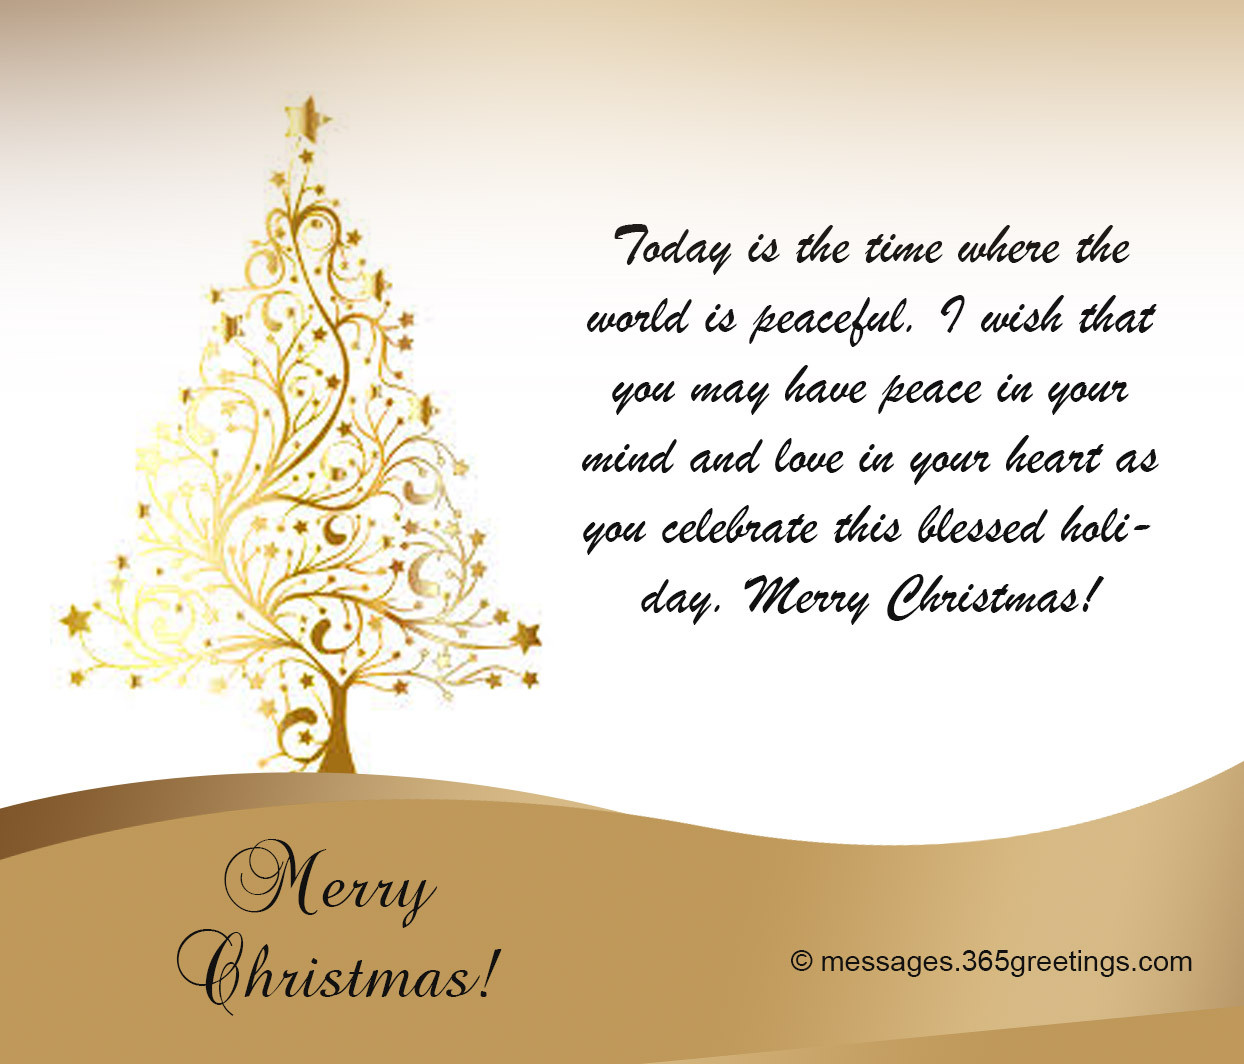 Christian Christmas Quotes For Cards
 Best Christmas Card Sayings and Greetings 365greetings